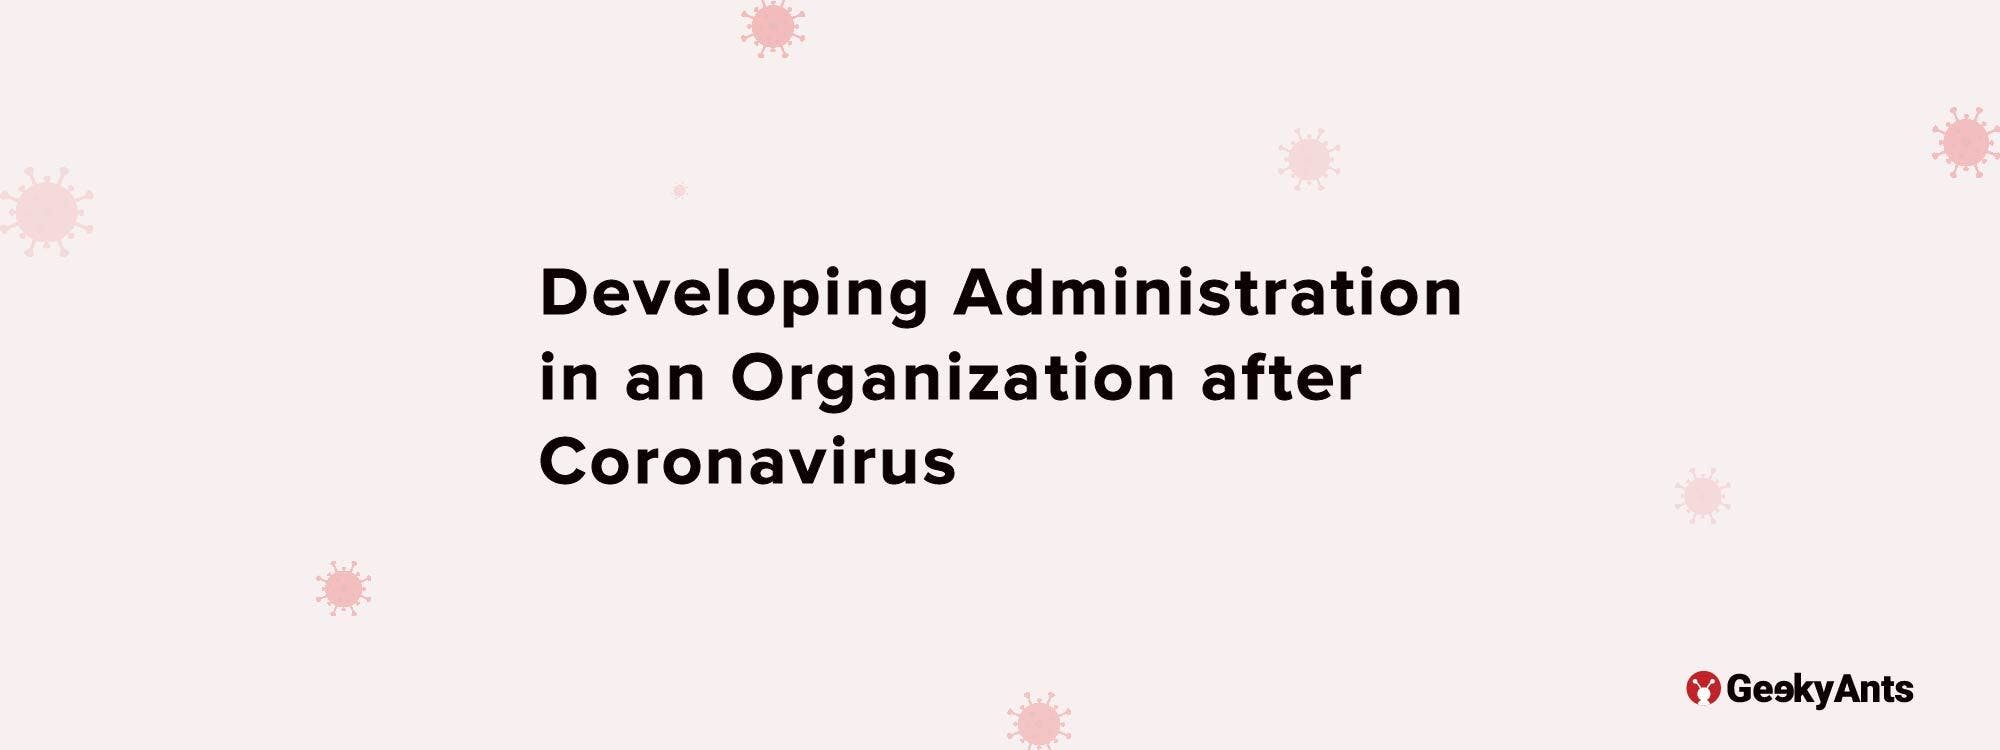 Developing Administration in an Organization after Coronavirus